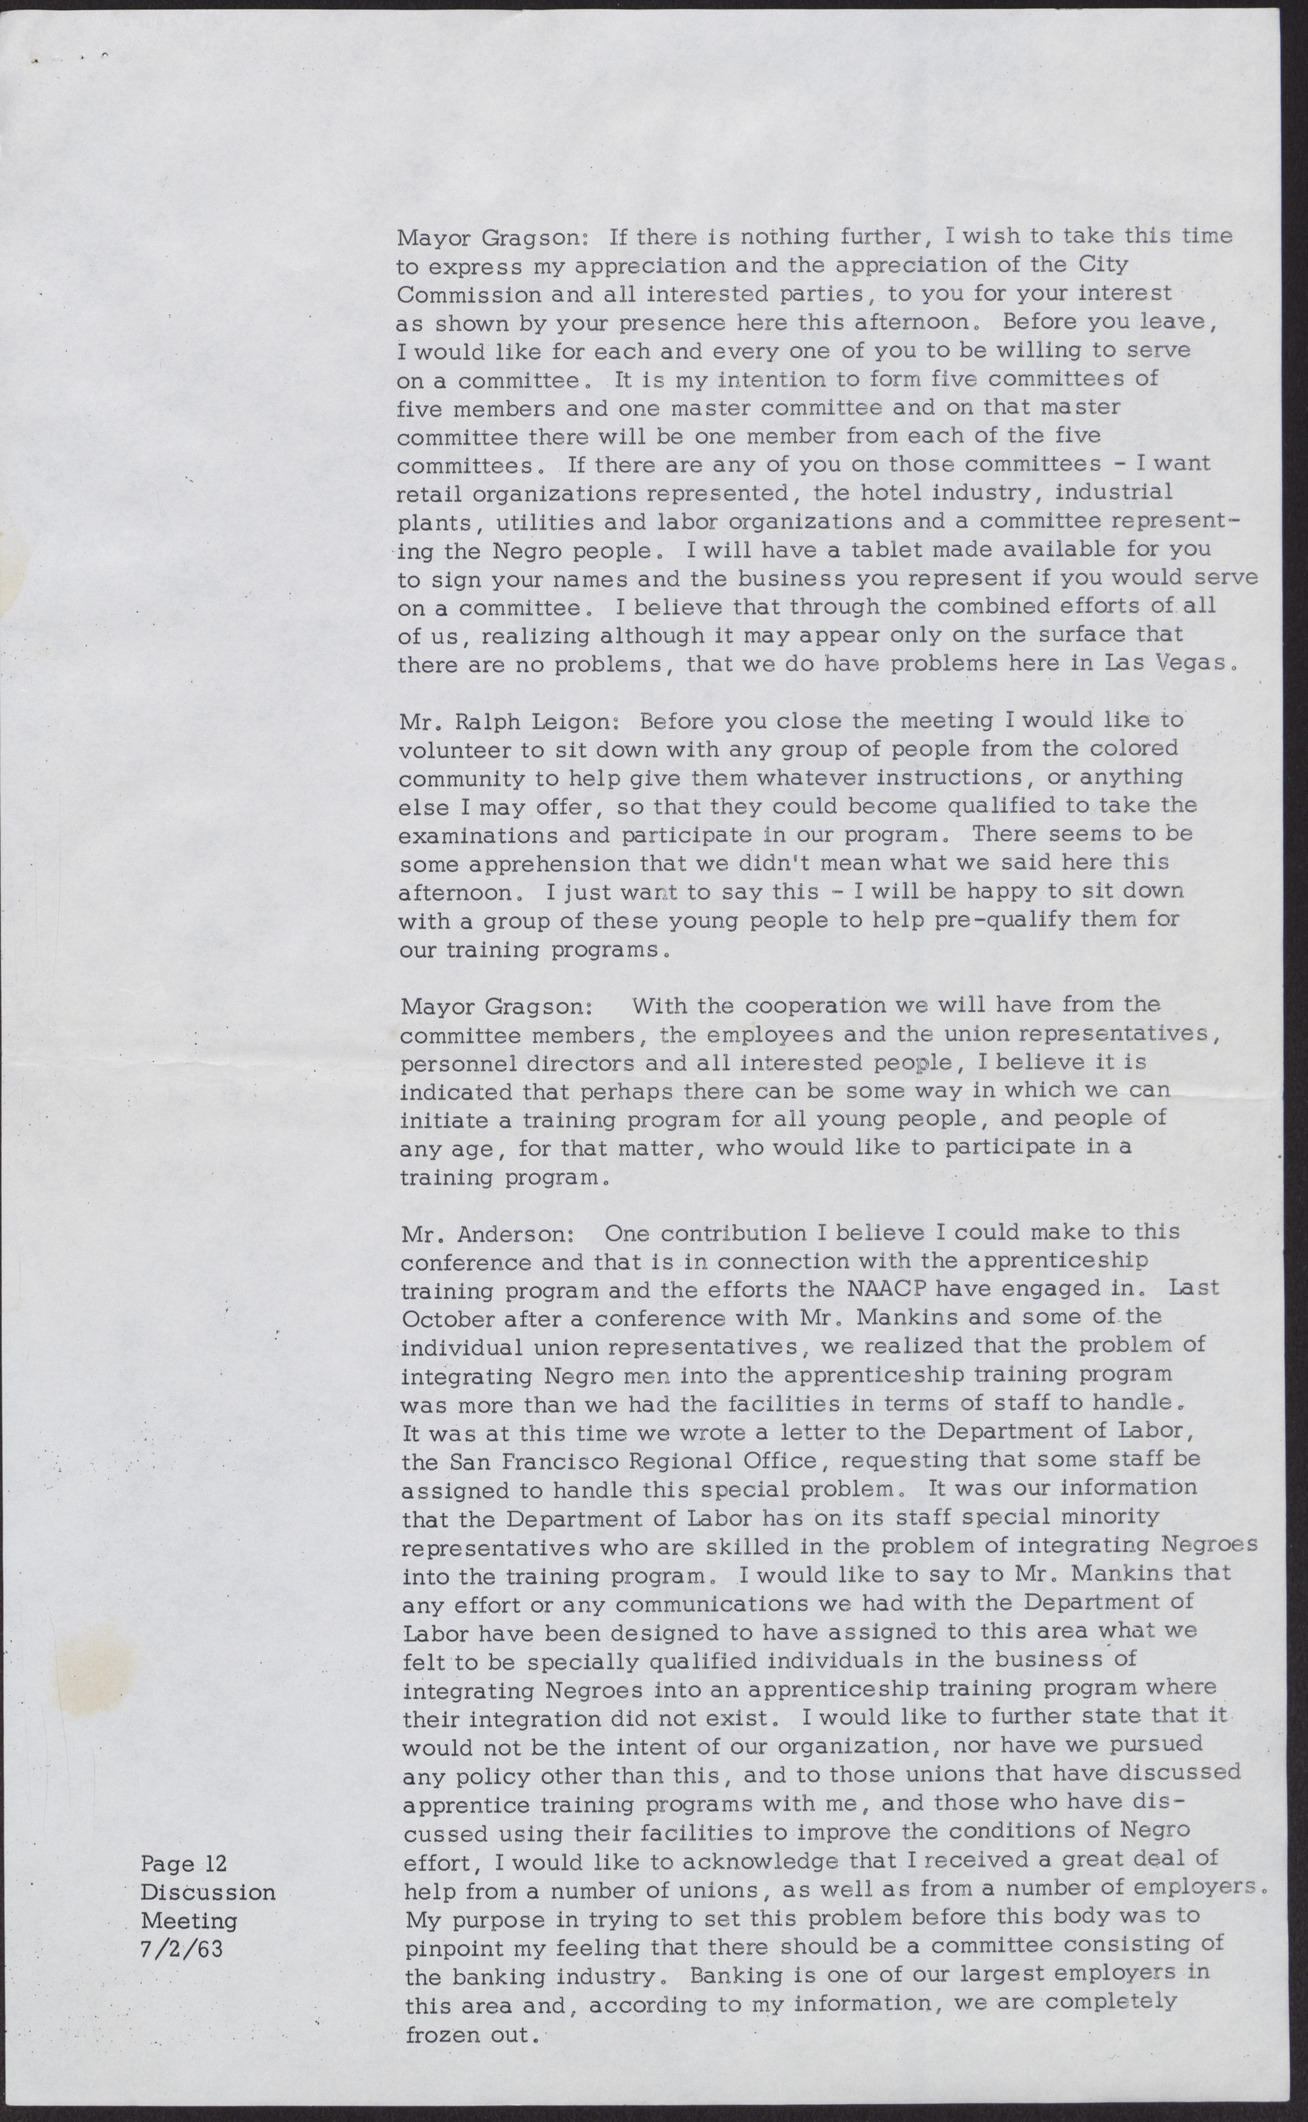 Minutes from a meeting with Board of Commissioners for the City of Las Vegas (13 pages), July 2, 1963, page 12